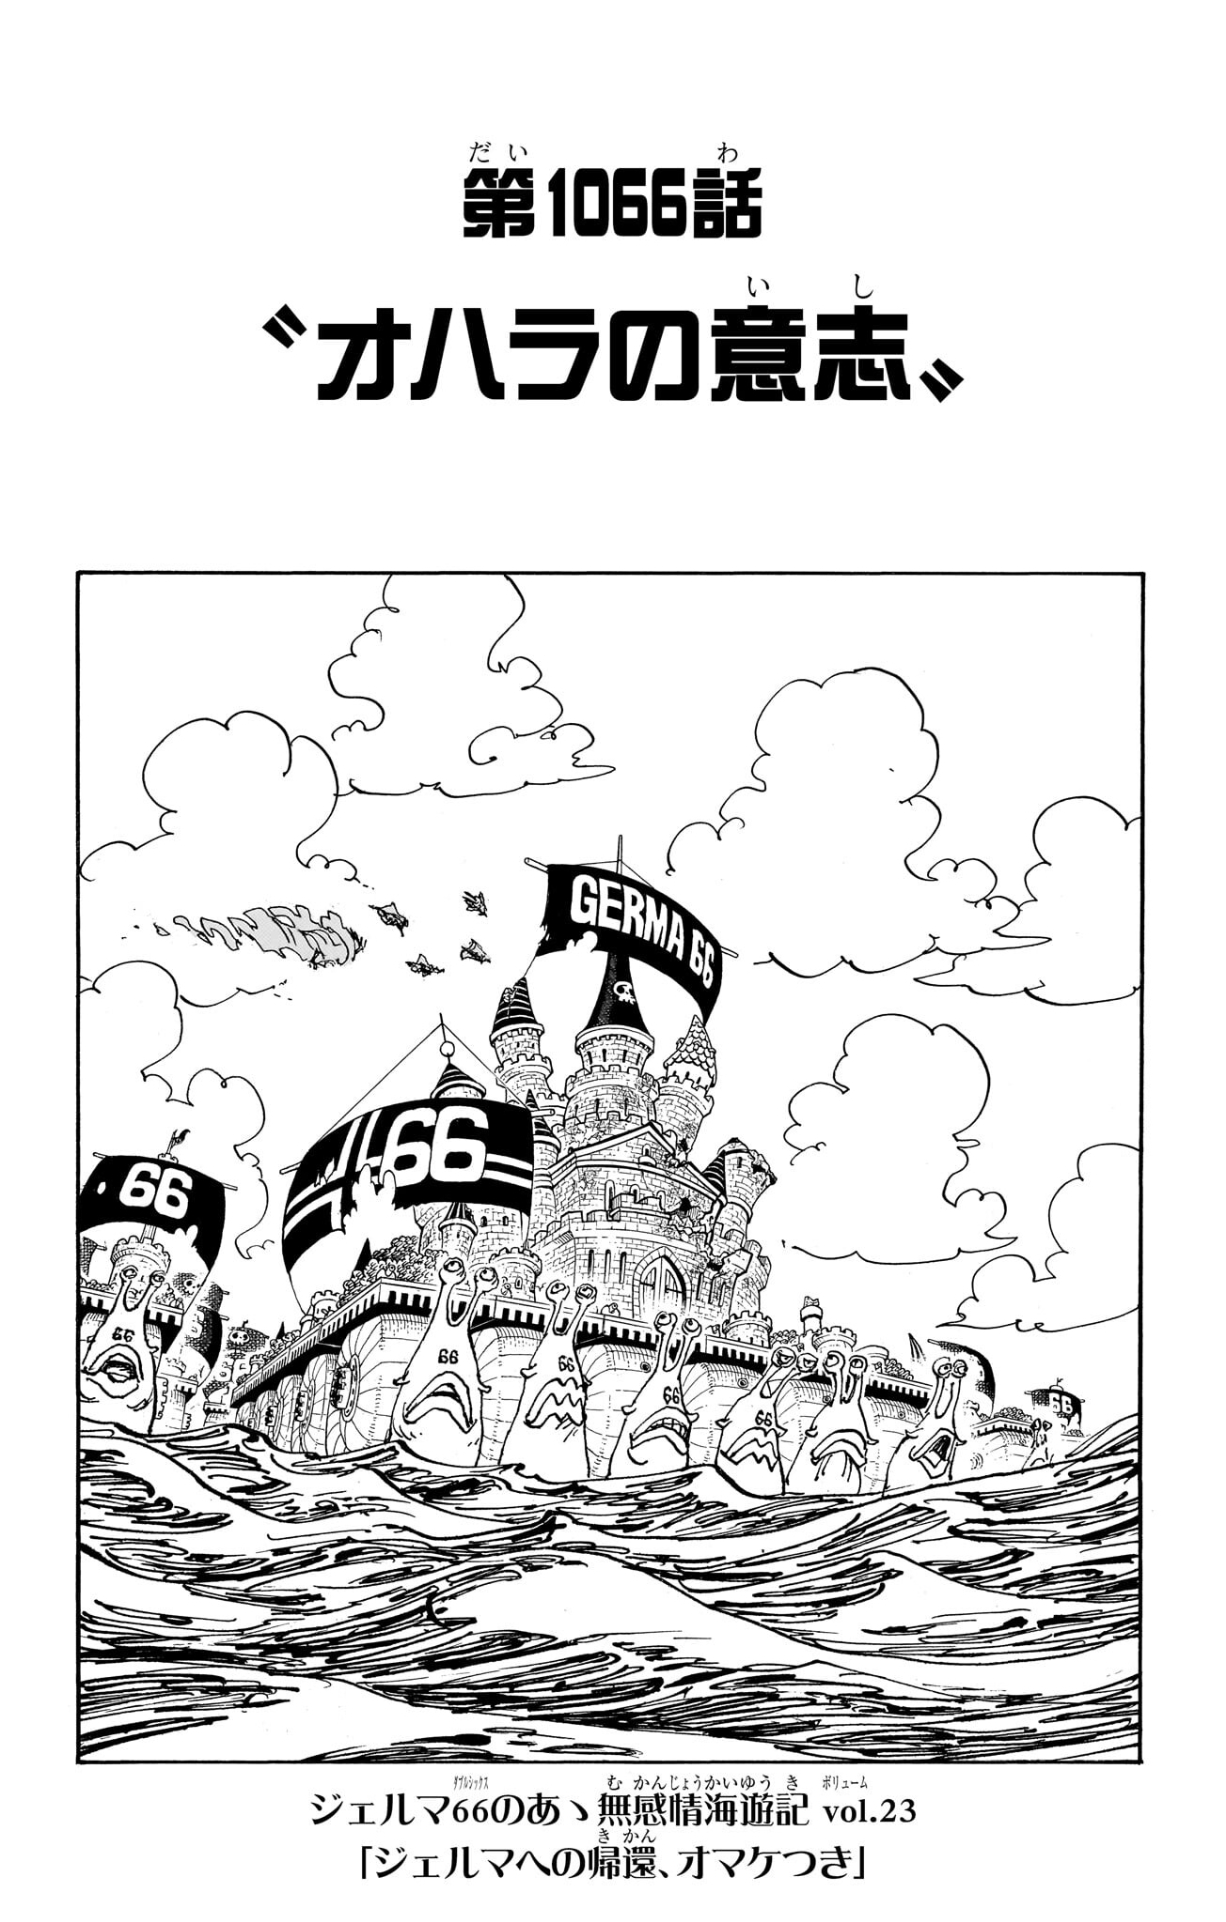 Read One Piece Chapter 1062 Spoilers: Possible Ally With Dr